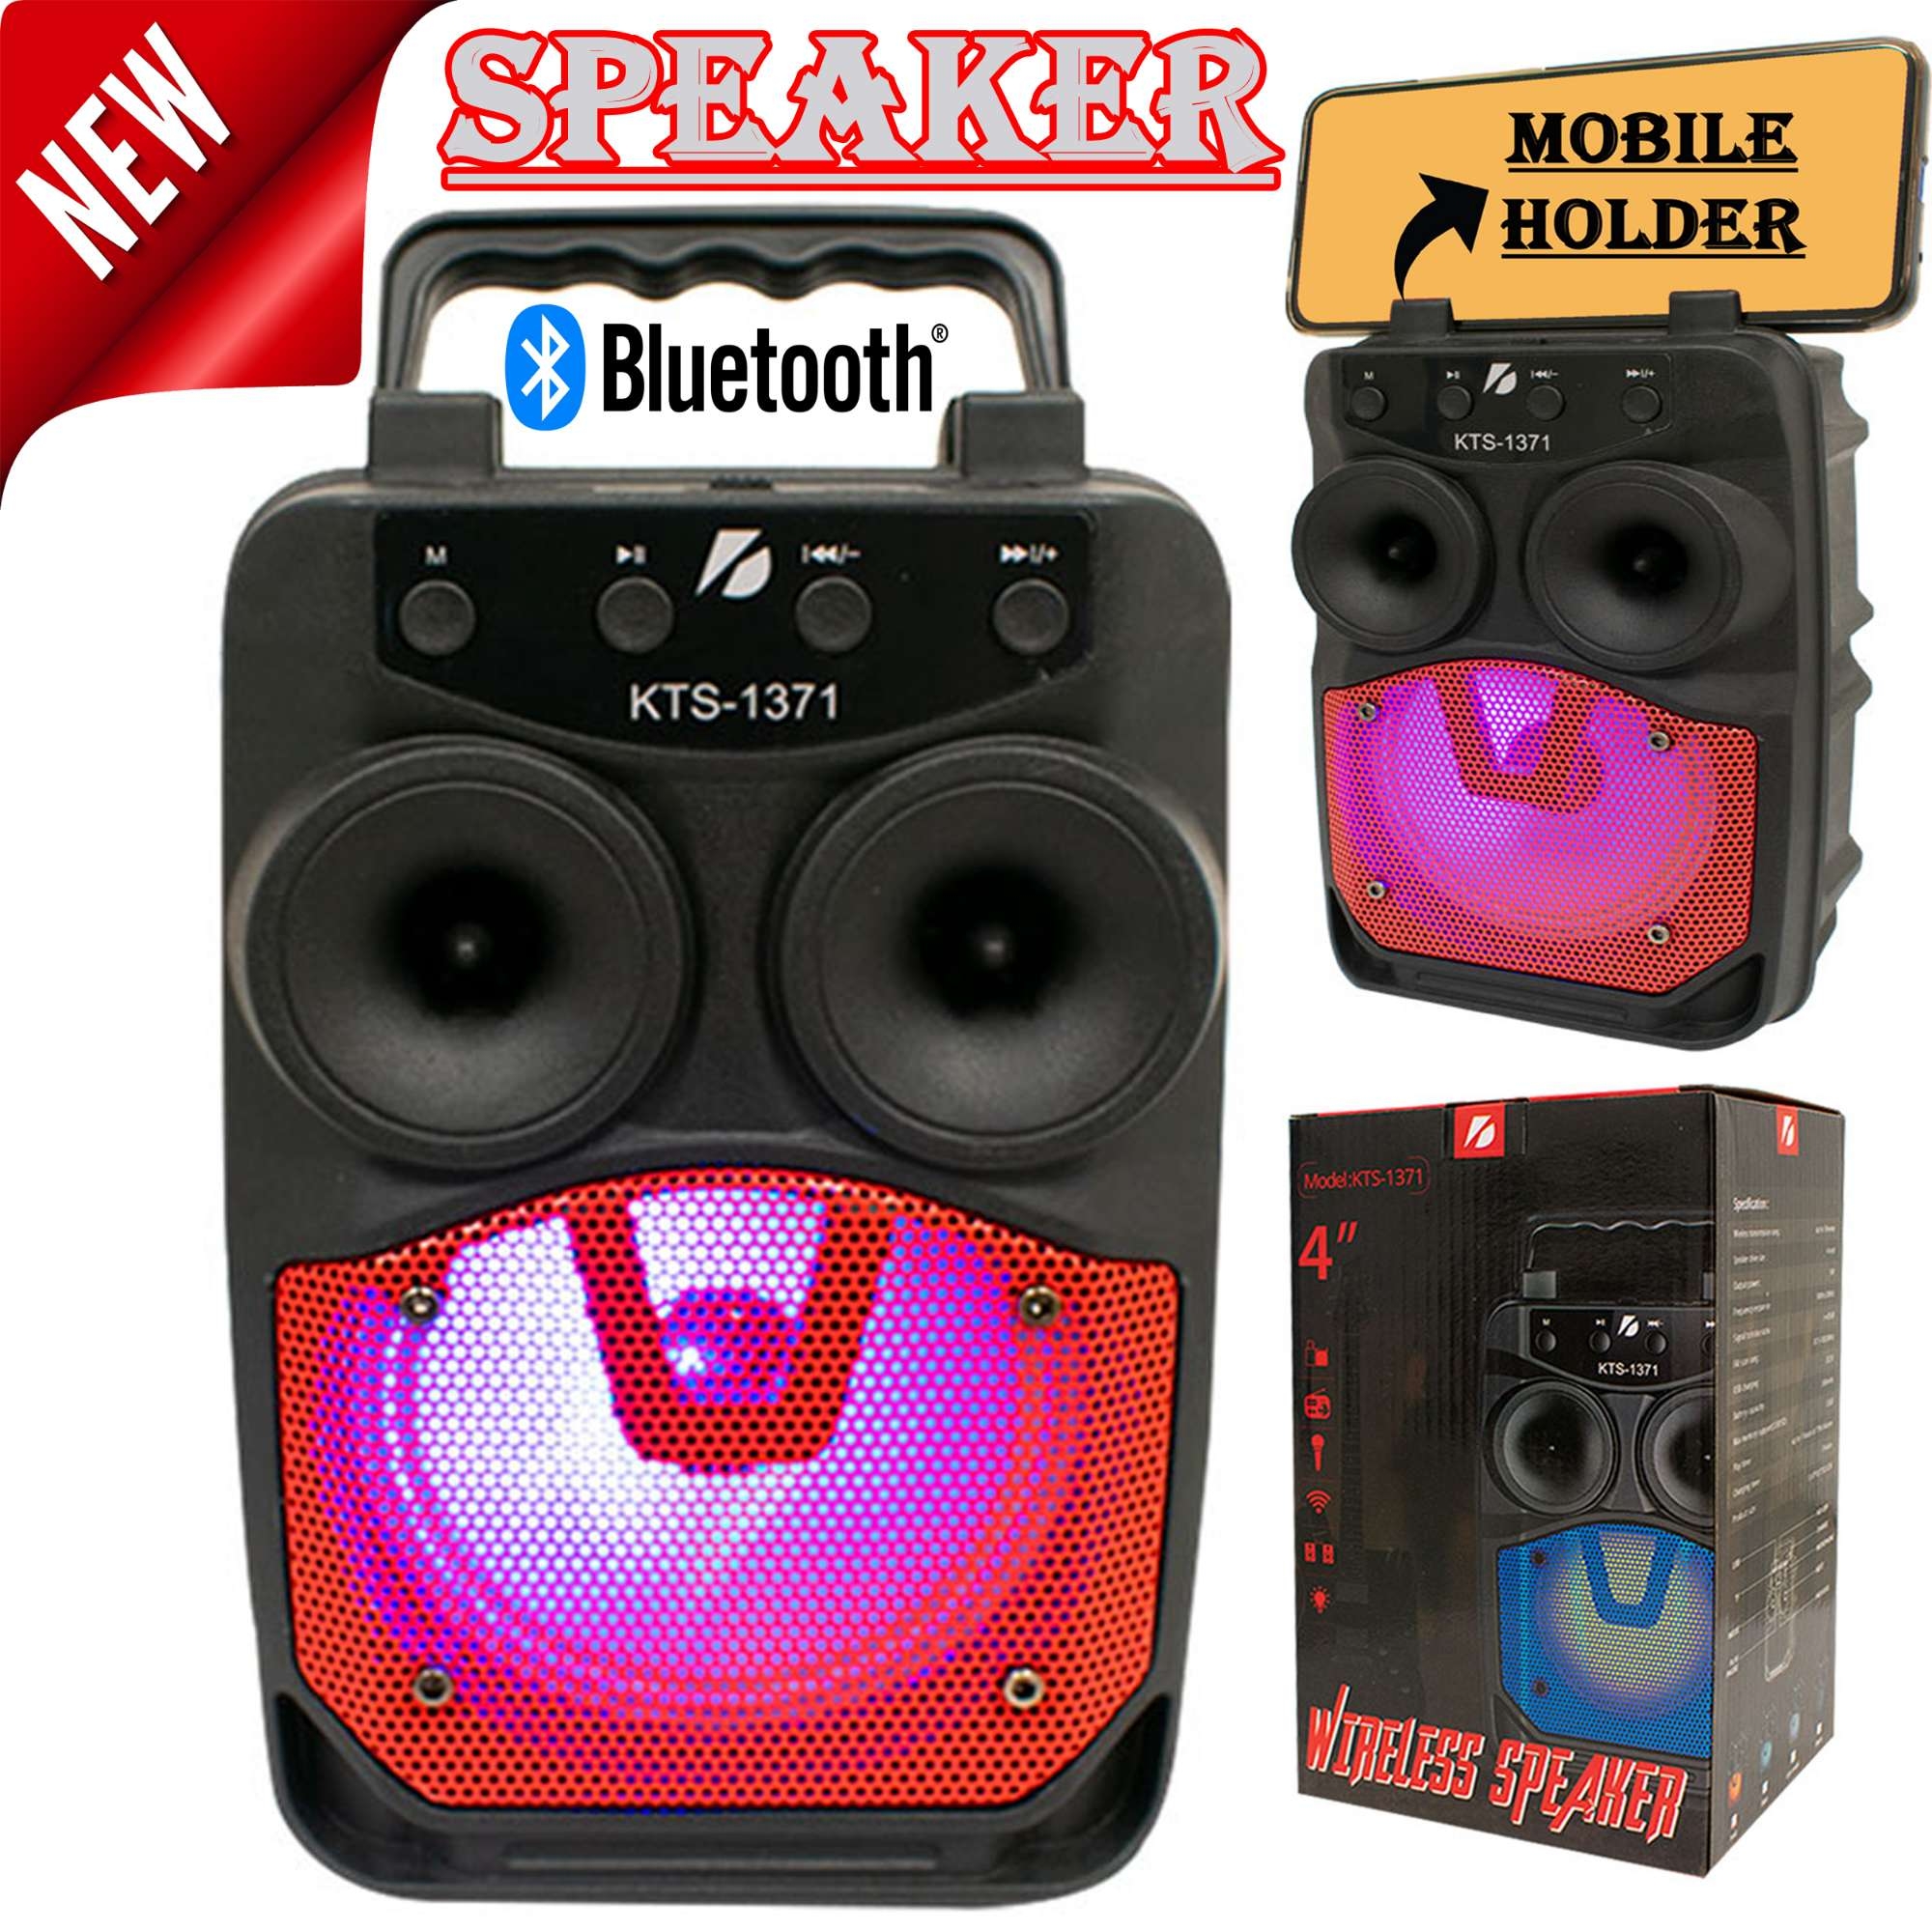 Wireless Speaker With Bluetooth And Mobile Holder